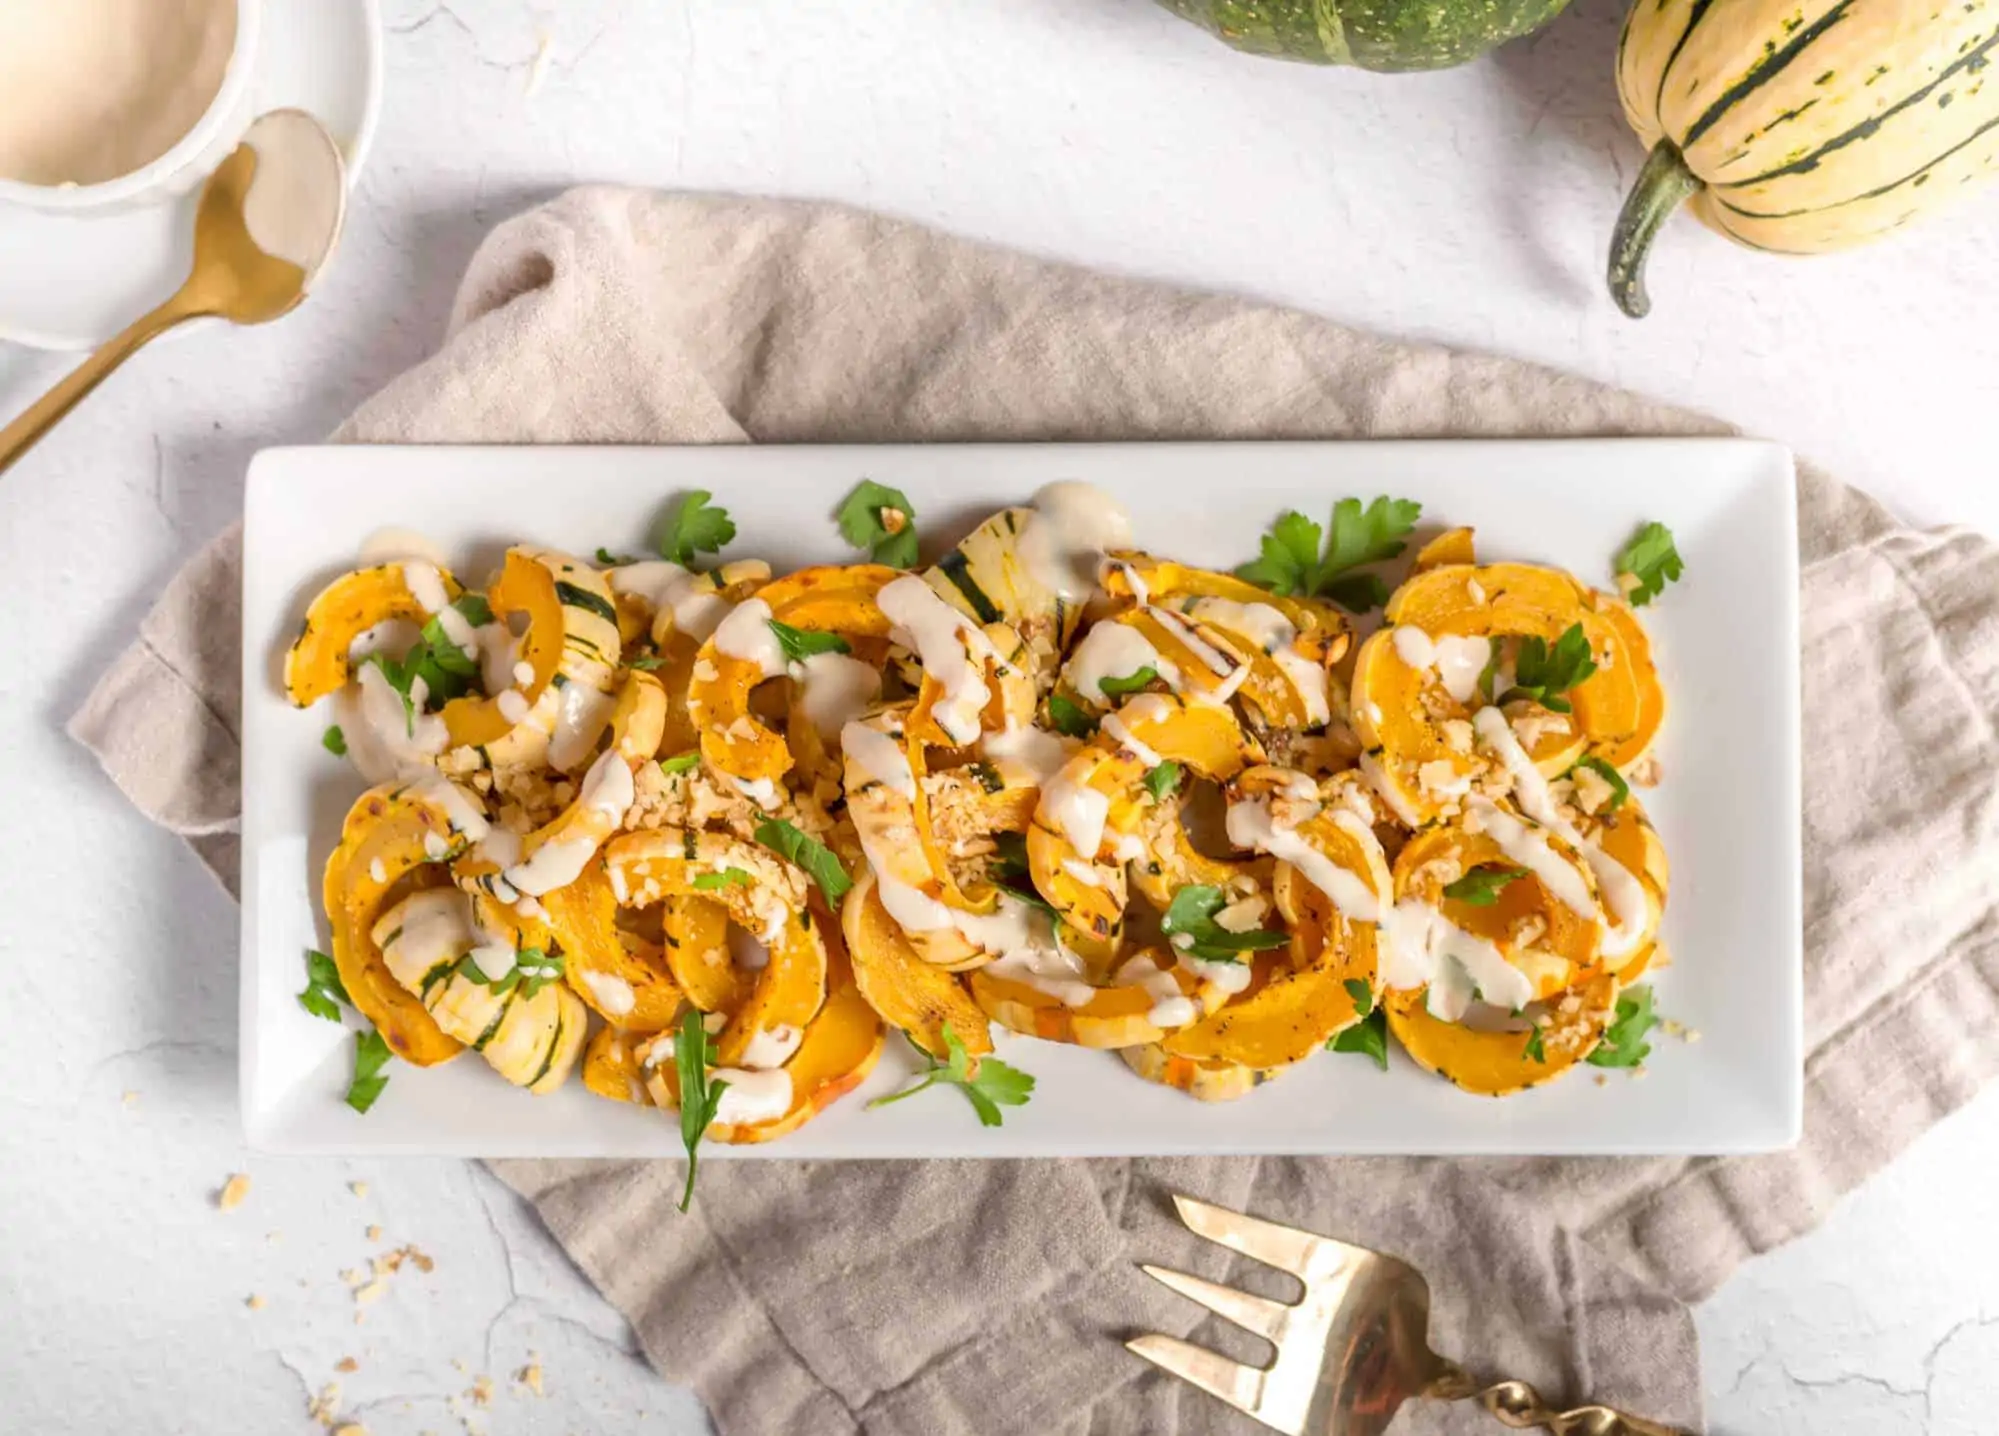 plate of roasted delicata squash drizzled with dressing and garnished with parsley